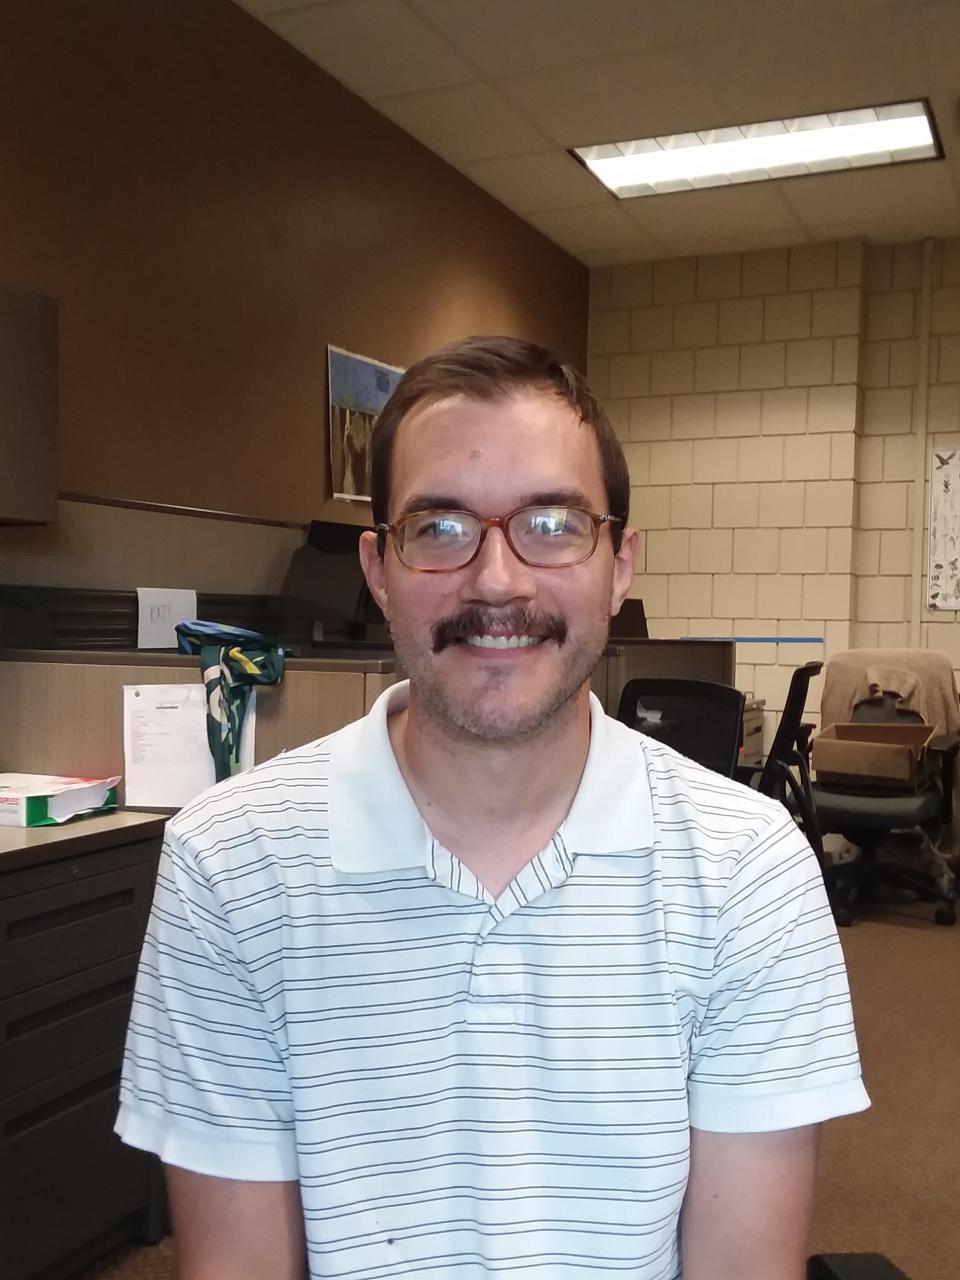 David J. Tomashefski is a research associate at Ohio State University's Soil, Water, and Environmental Lab. SWEL is a service laboratory within the School of Environment and Natural Resources.